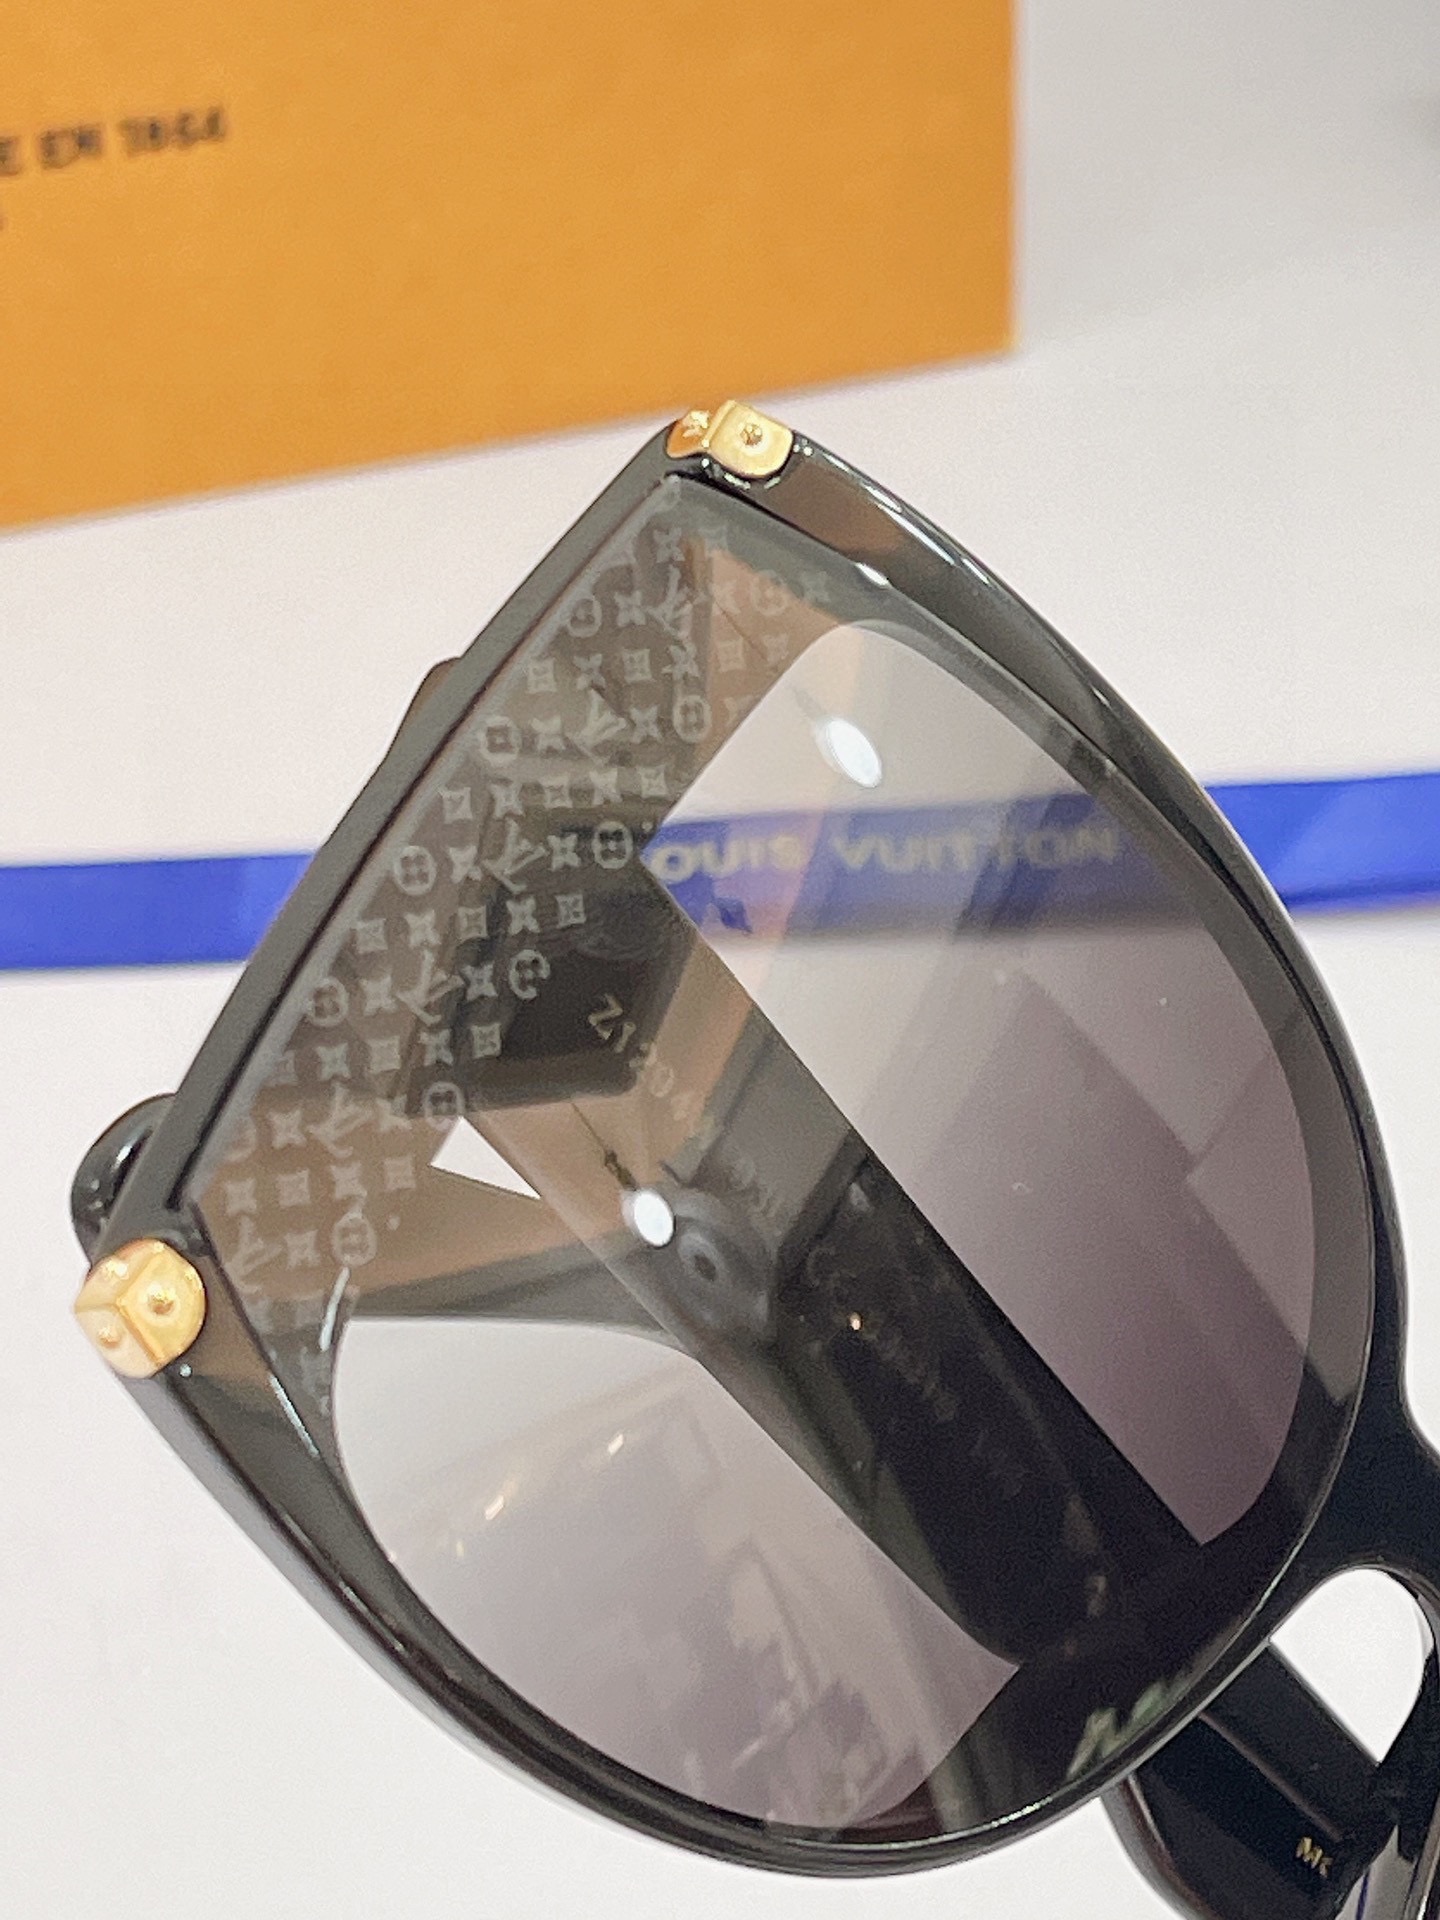 Louis Vuitton 'In The Mood For Love' Sunglasses – The Luxury Quest